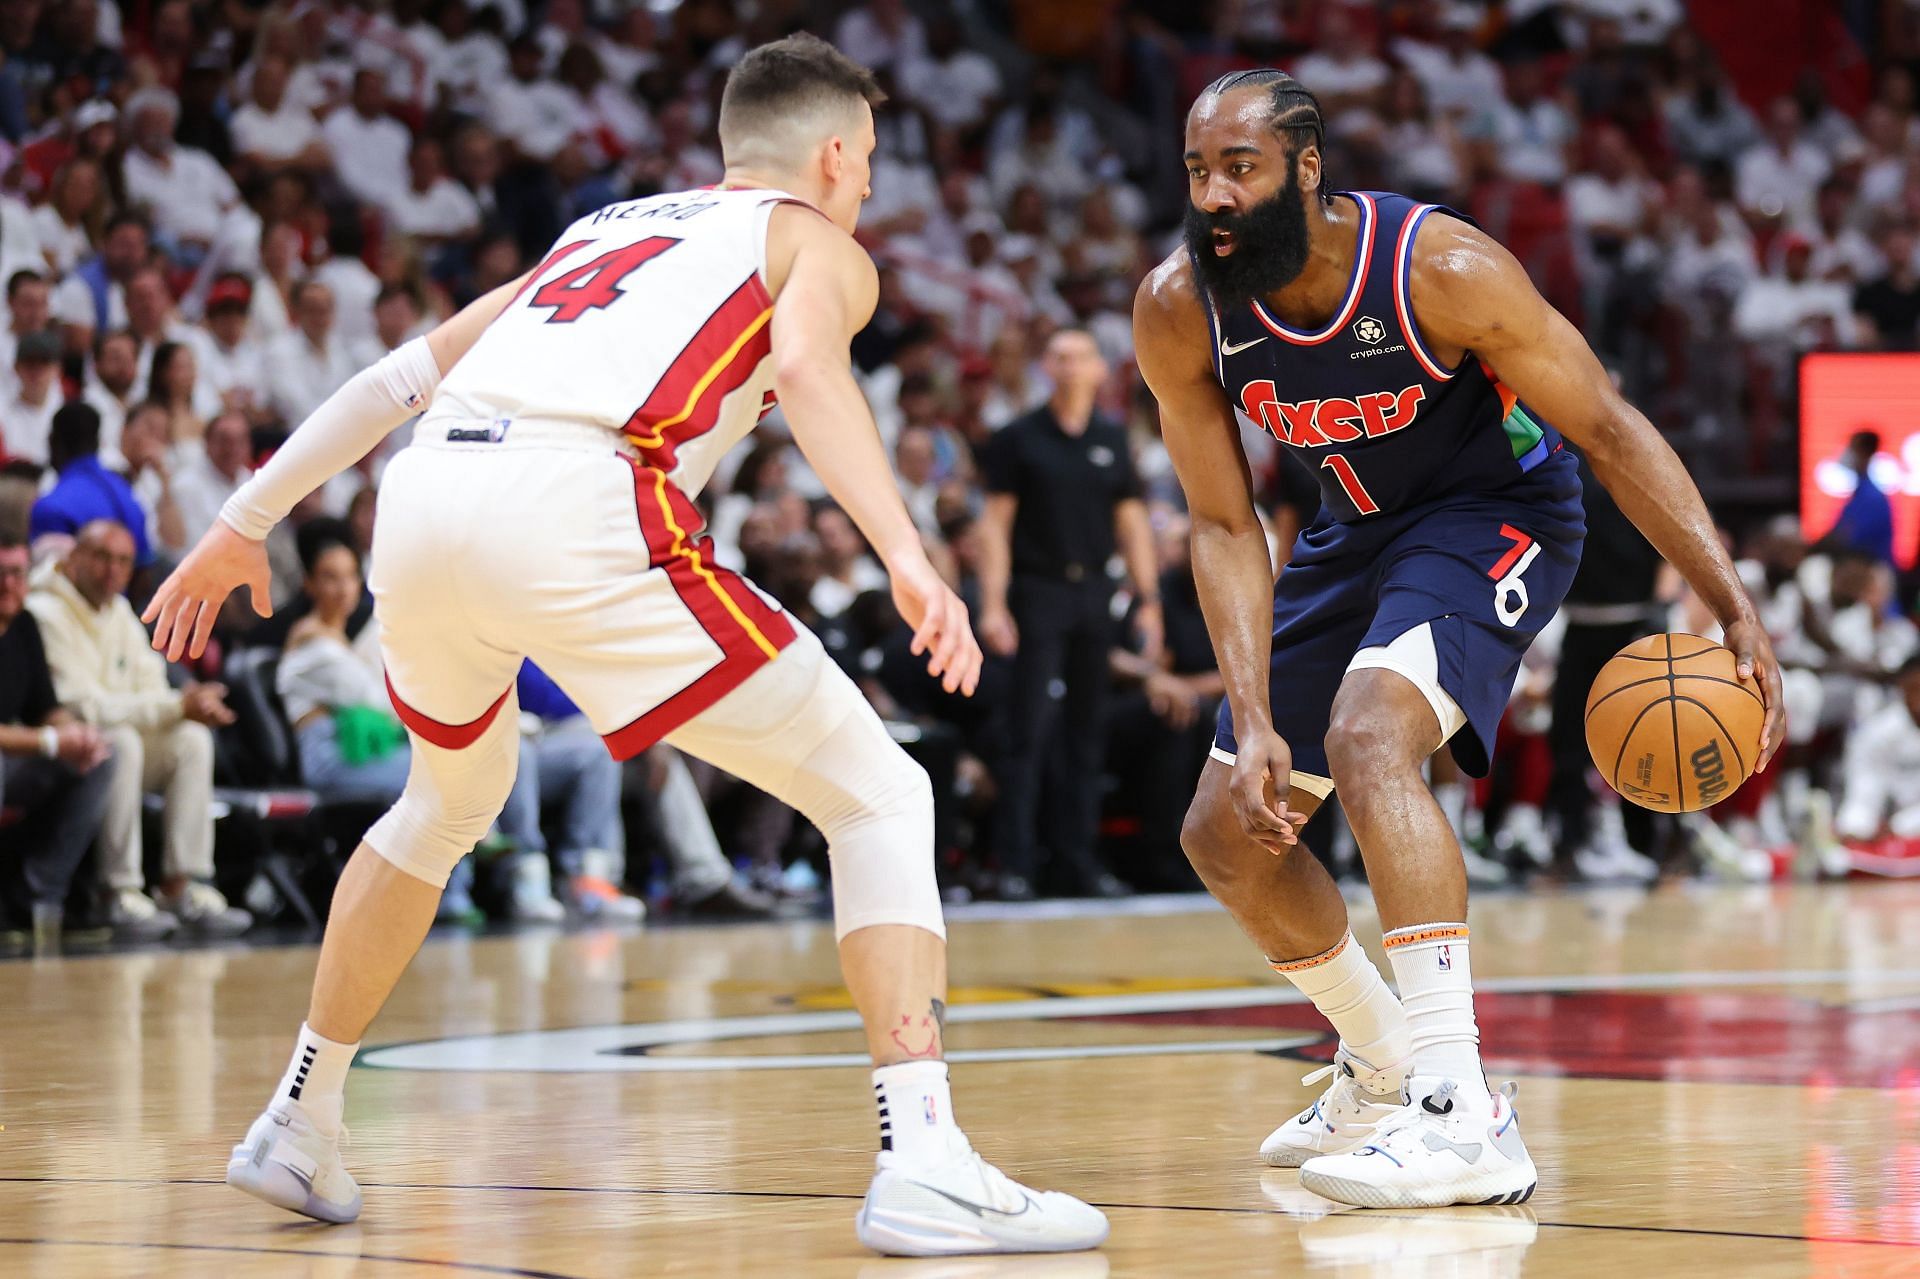 James Harden of the Philadelphia 76ers defended by Tyler Herro of the Miami Heat in Game 1